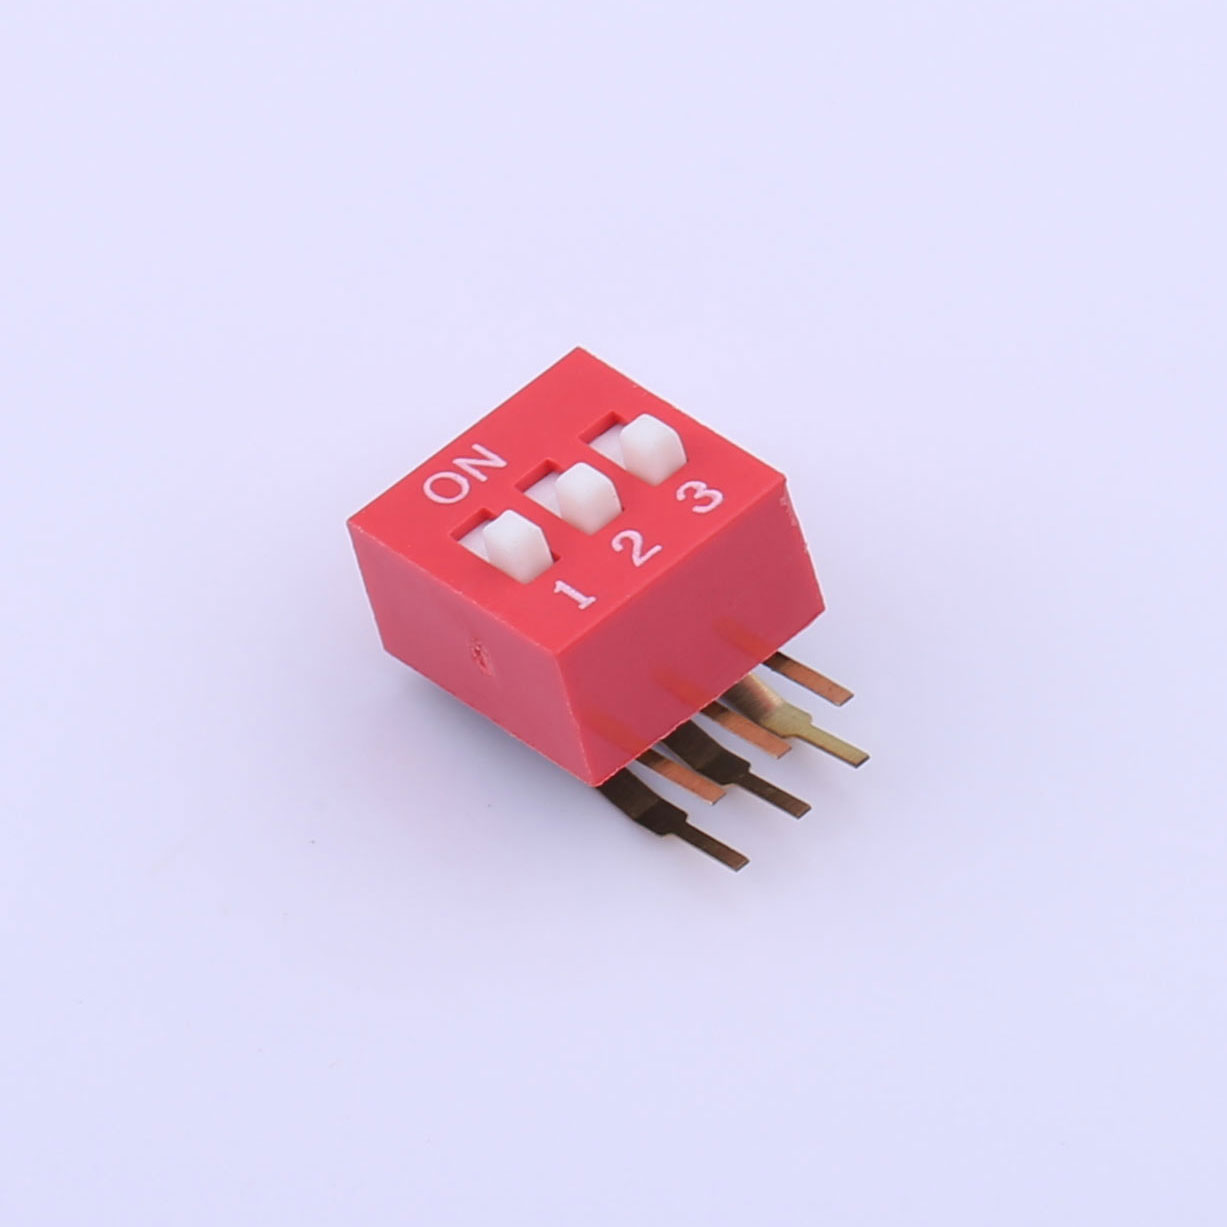 Kinghelm Pitch 2.54mm 3 Positions Red Dip Switch 100mA 24V - KH-BM2.54-3P-W